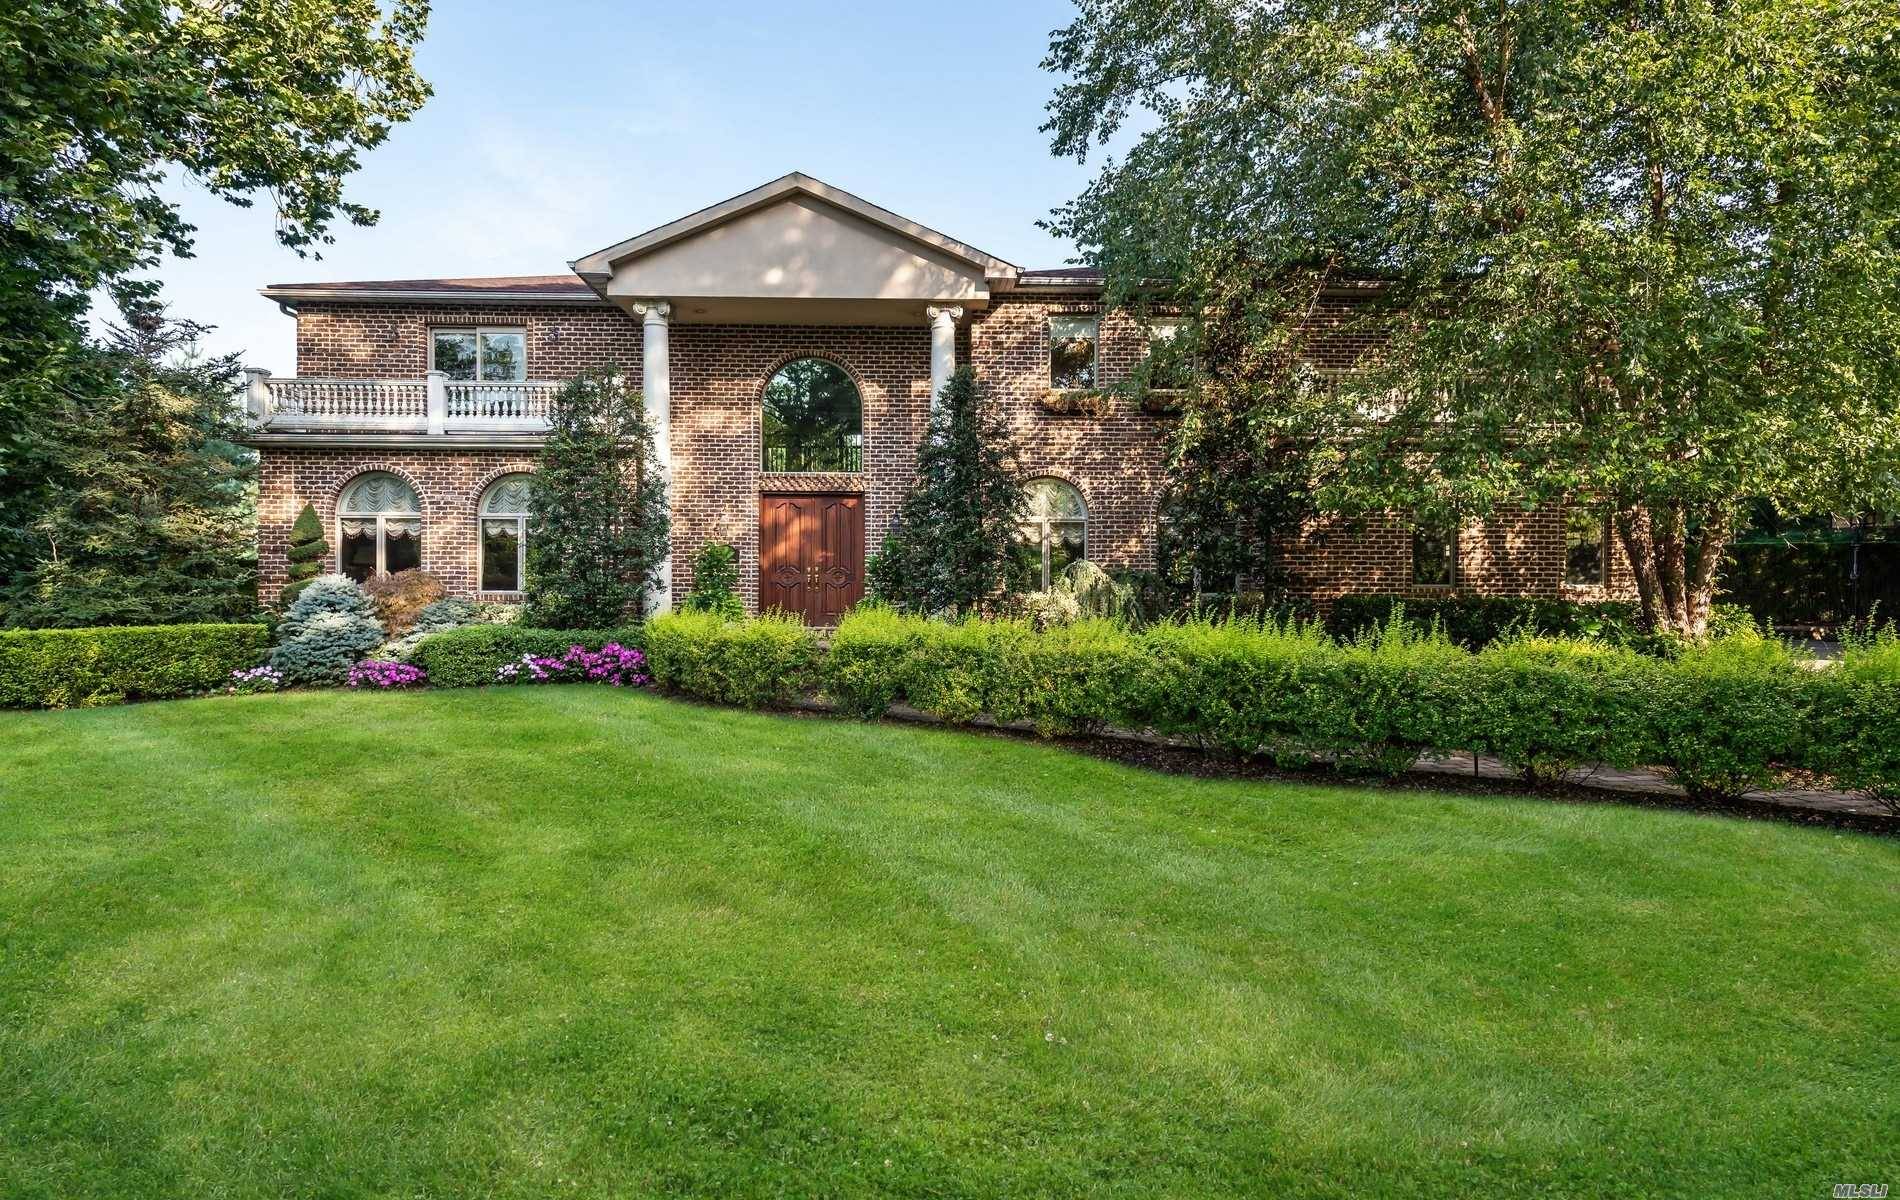 Grand Center Hall Colonial on a Cul de Sac in The Heart of Roslyn Country Club.